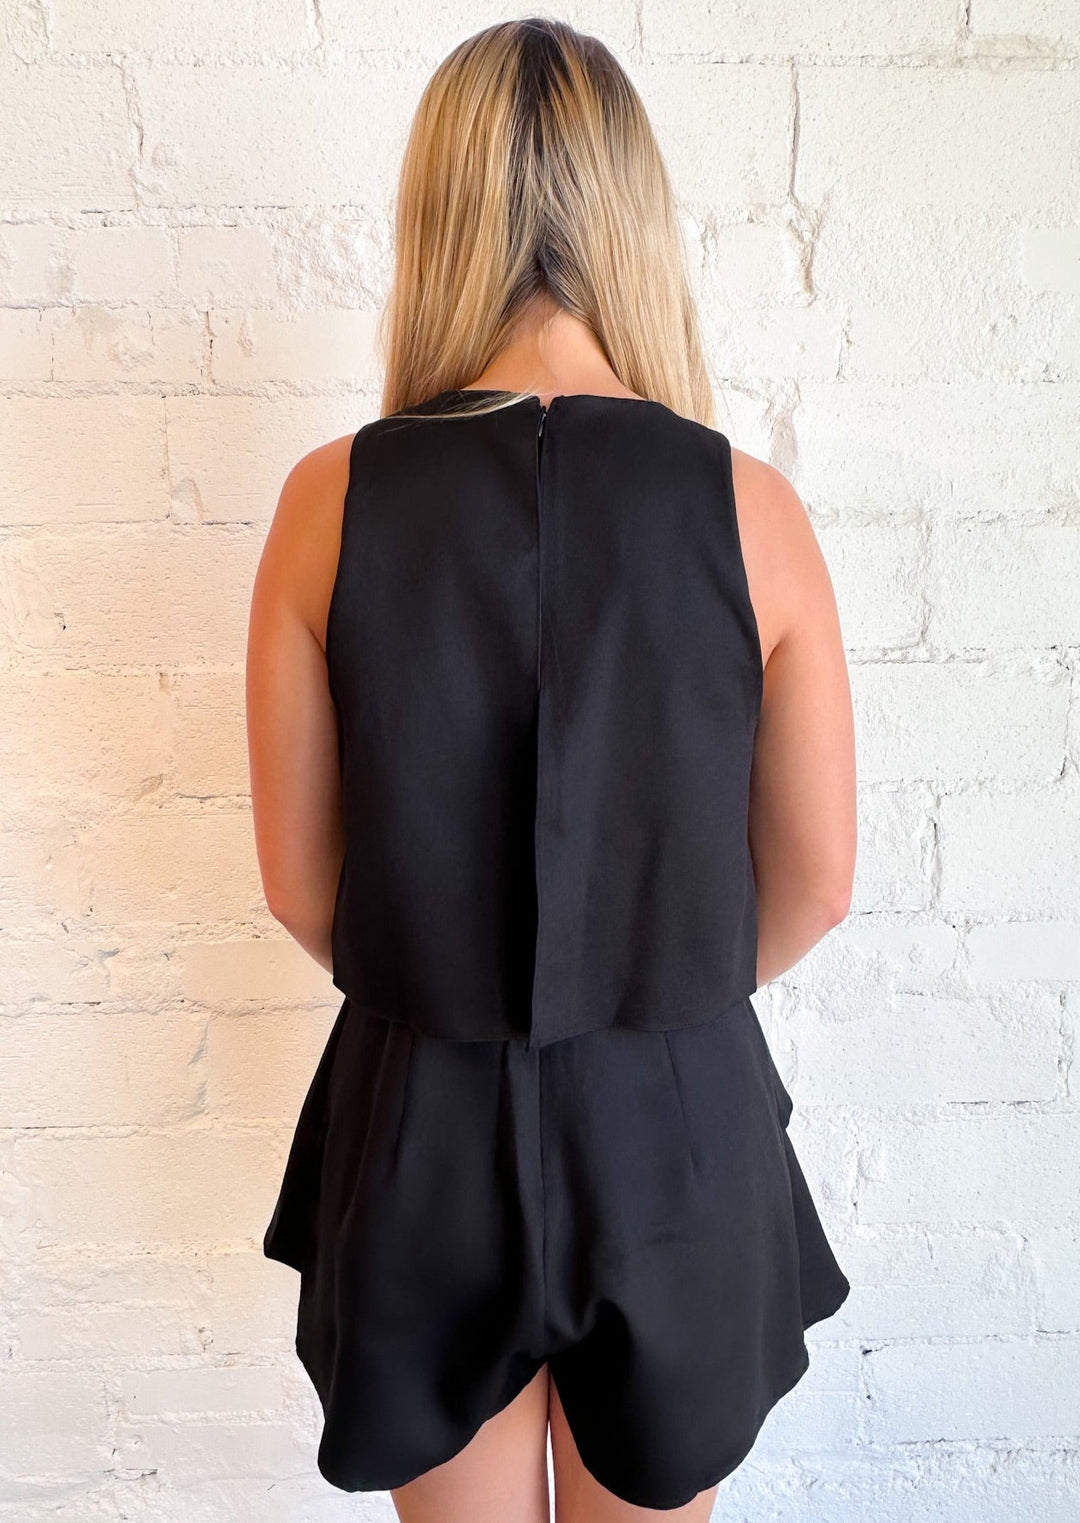 What You Want Romper, romper, Adeline, Adeline, dallas boutique, dallas texas, texas boutique, women's boutique dallas, adeline boutique, dallas boutique, trendy boutique, affordable boutique